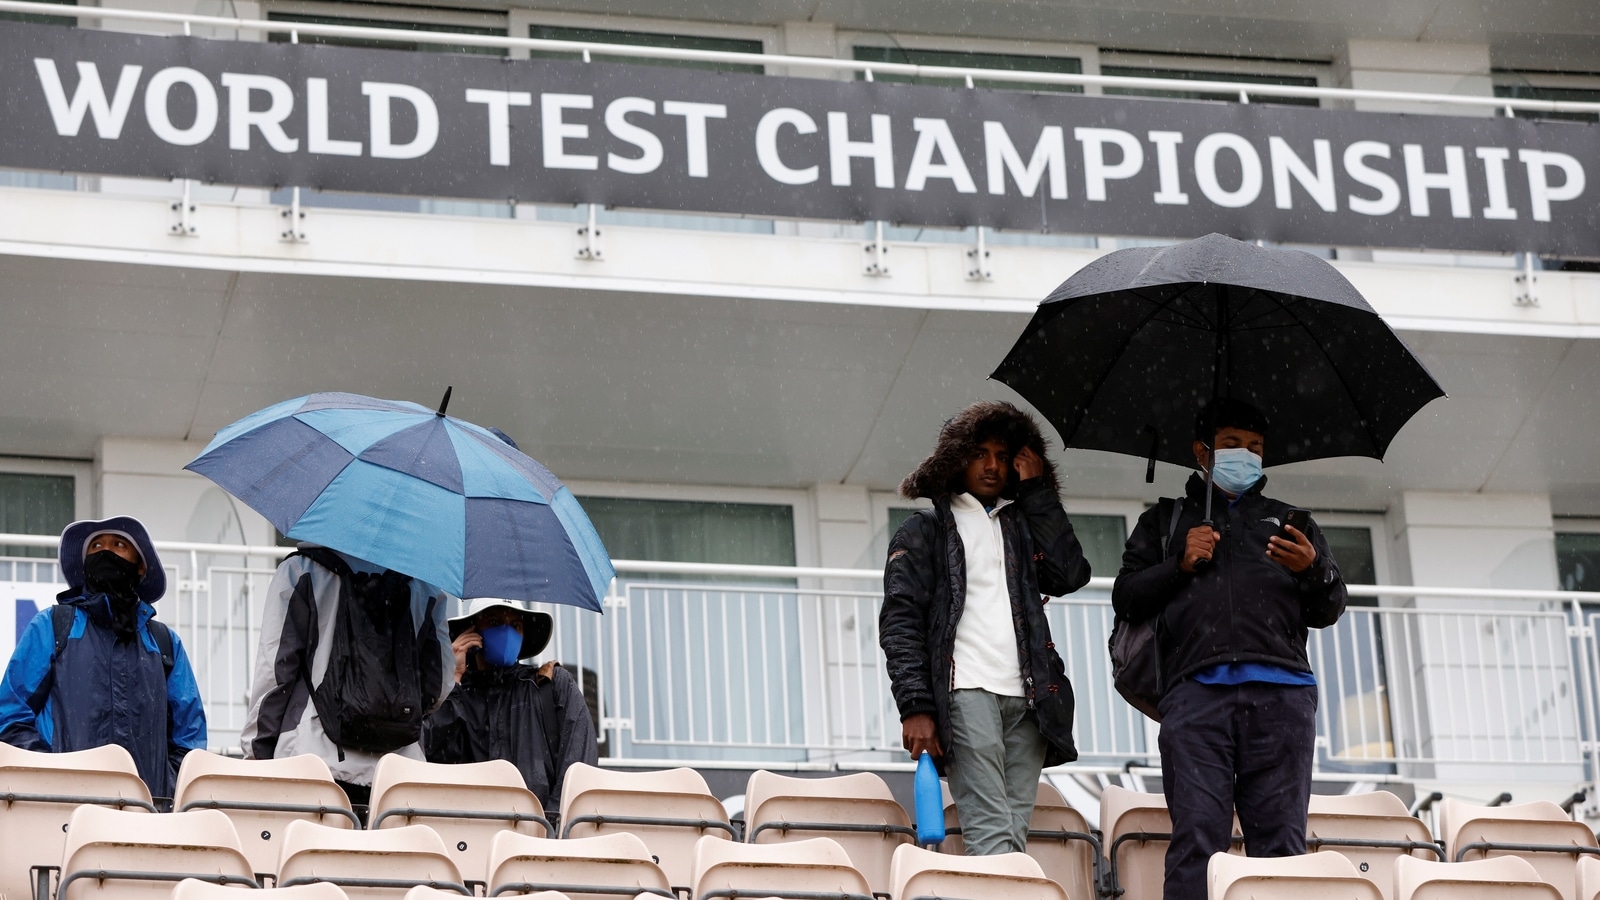 Fans lash out at ICC on Twitter after rain washes out first session of India vs New Zealand WTC final in Southampton | Cricket - Hindustan Times